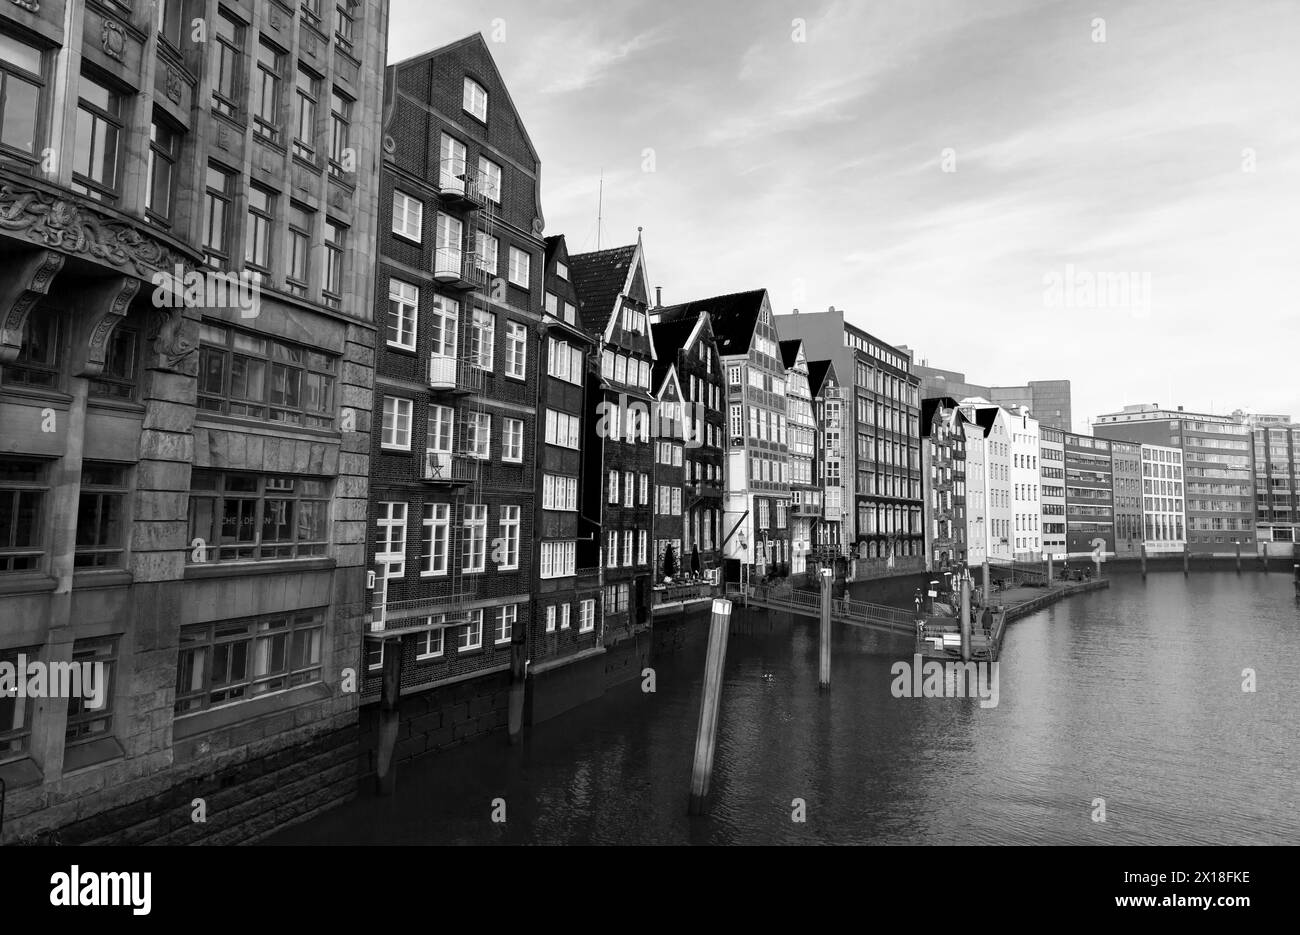 Hamburg, Germany - November 30, 2018: Old Hamburg town coastal view with facades of living houses of Altstadt district, black and white photo Stock Photo